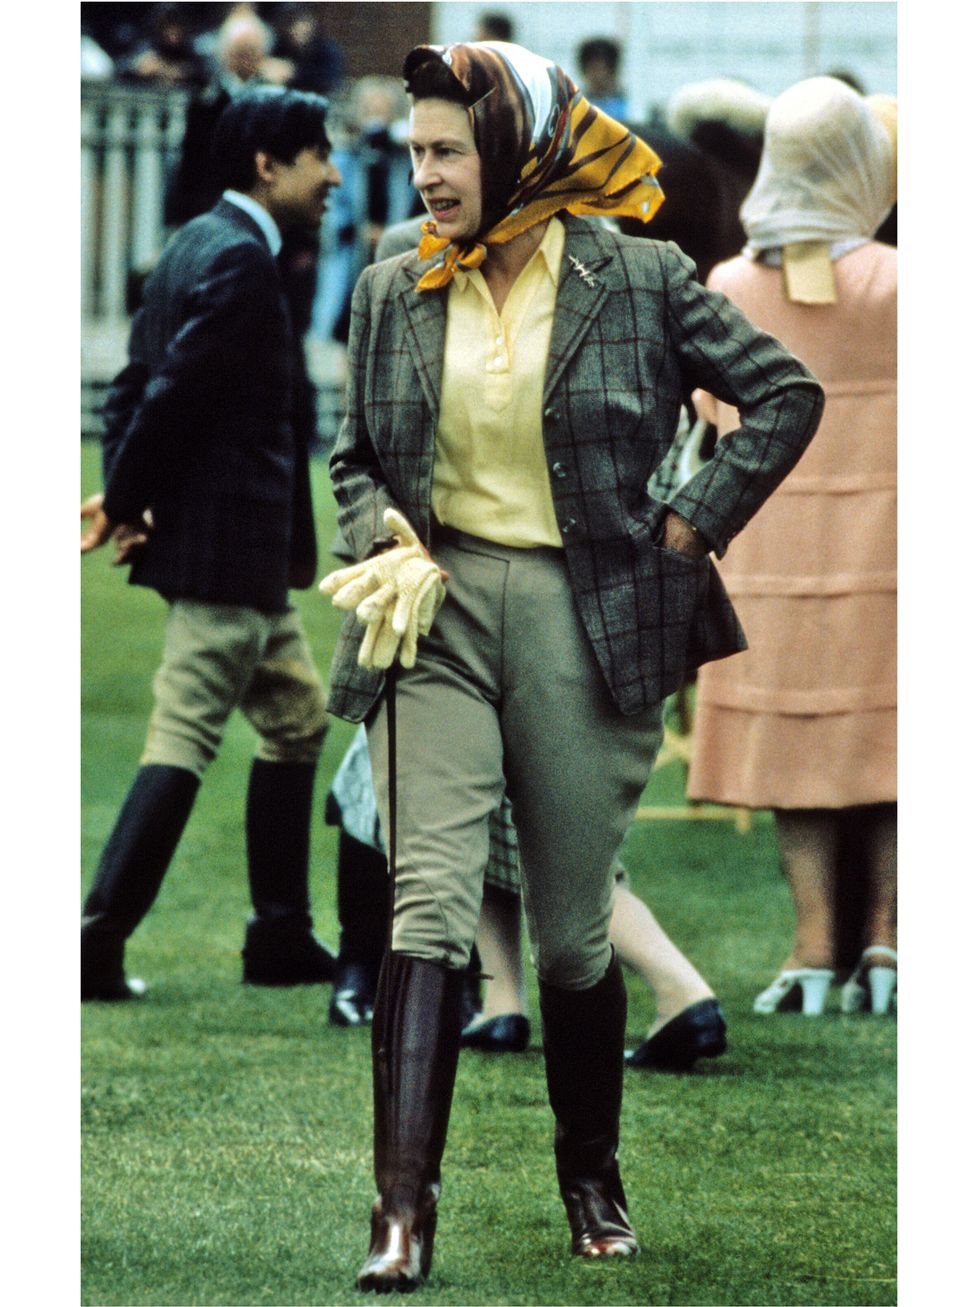 windsorunited kingdom   may queen elizabeth ll walks around windsor horse show,windsor,england wearing riding gear in may of 1988 photo by anwar husseingetty images